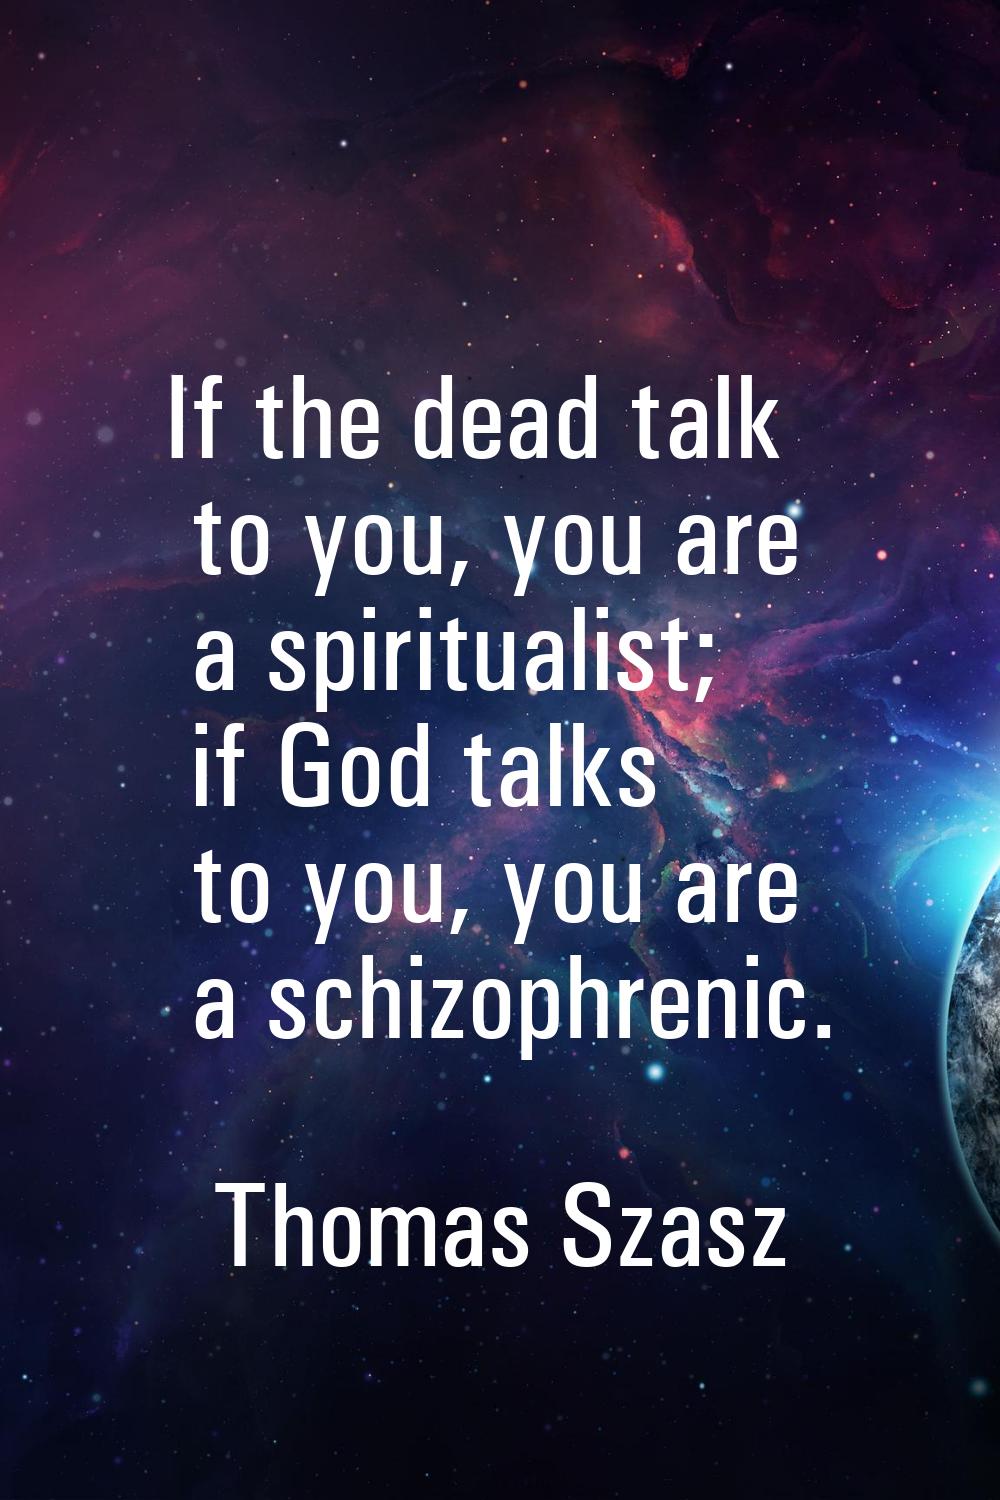 If the dead talk to you, you are a spiritualist; if God talks to you, you are a schizophrenic.